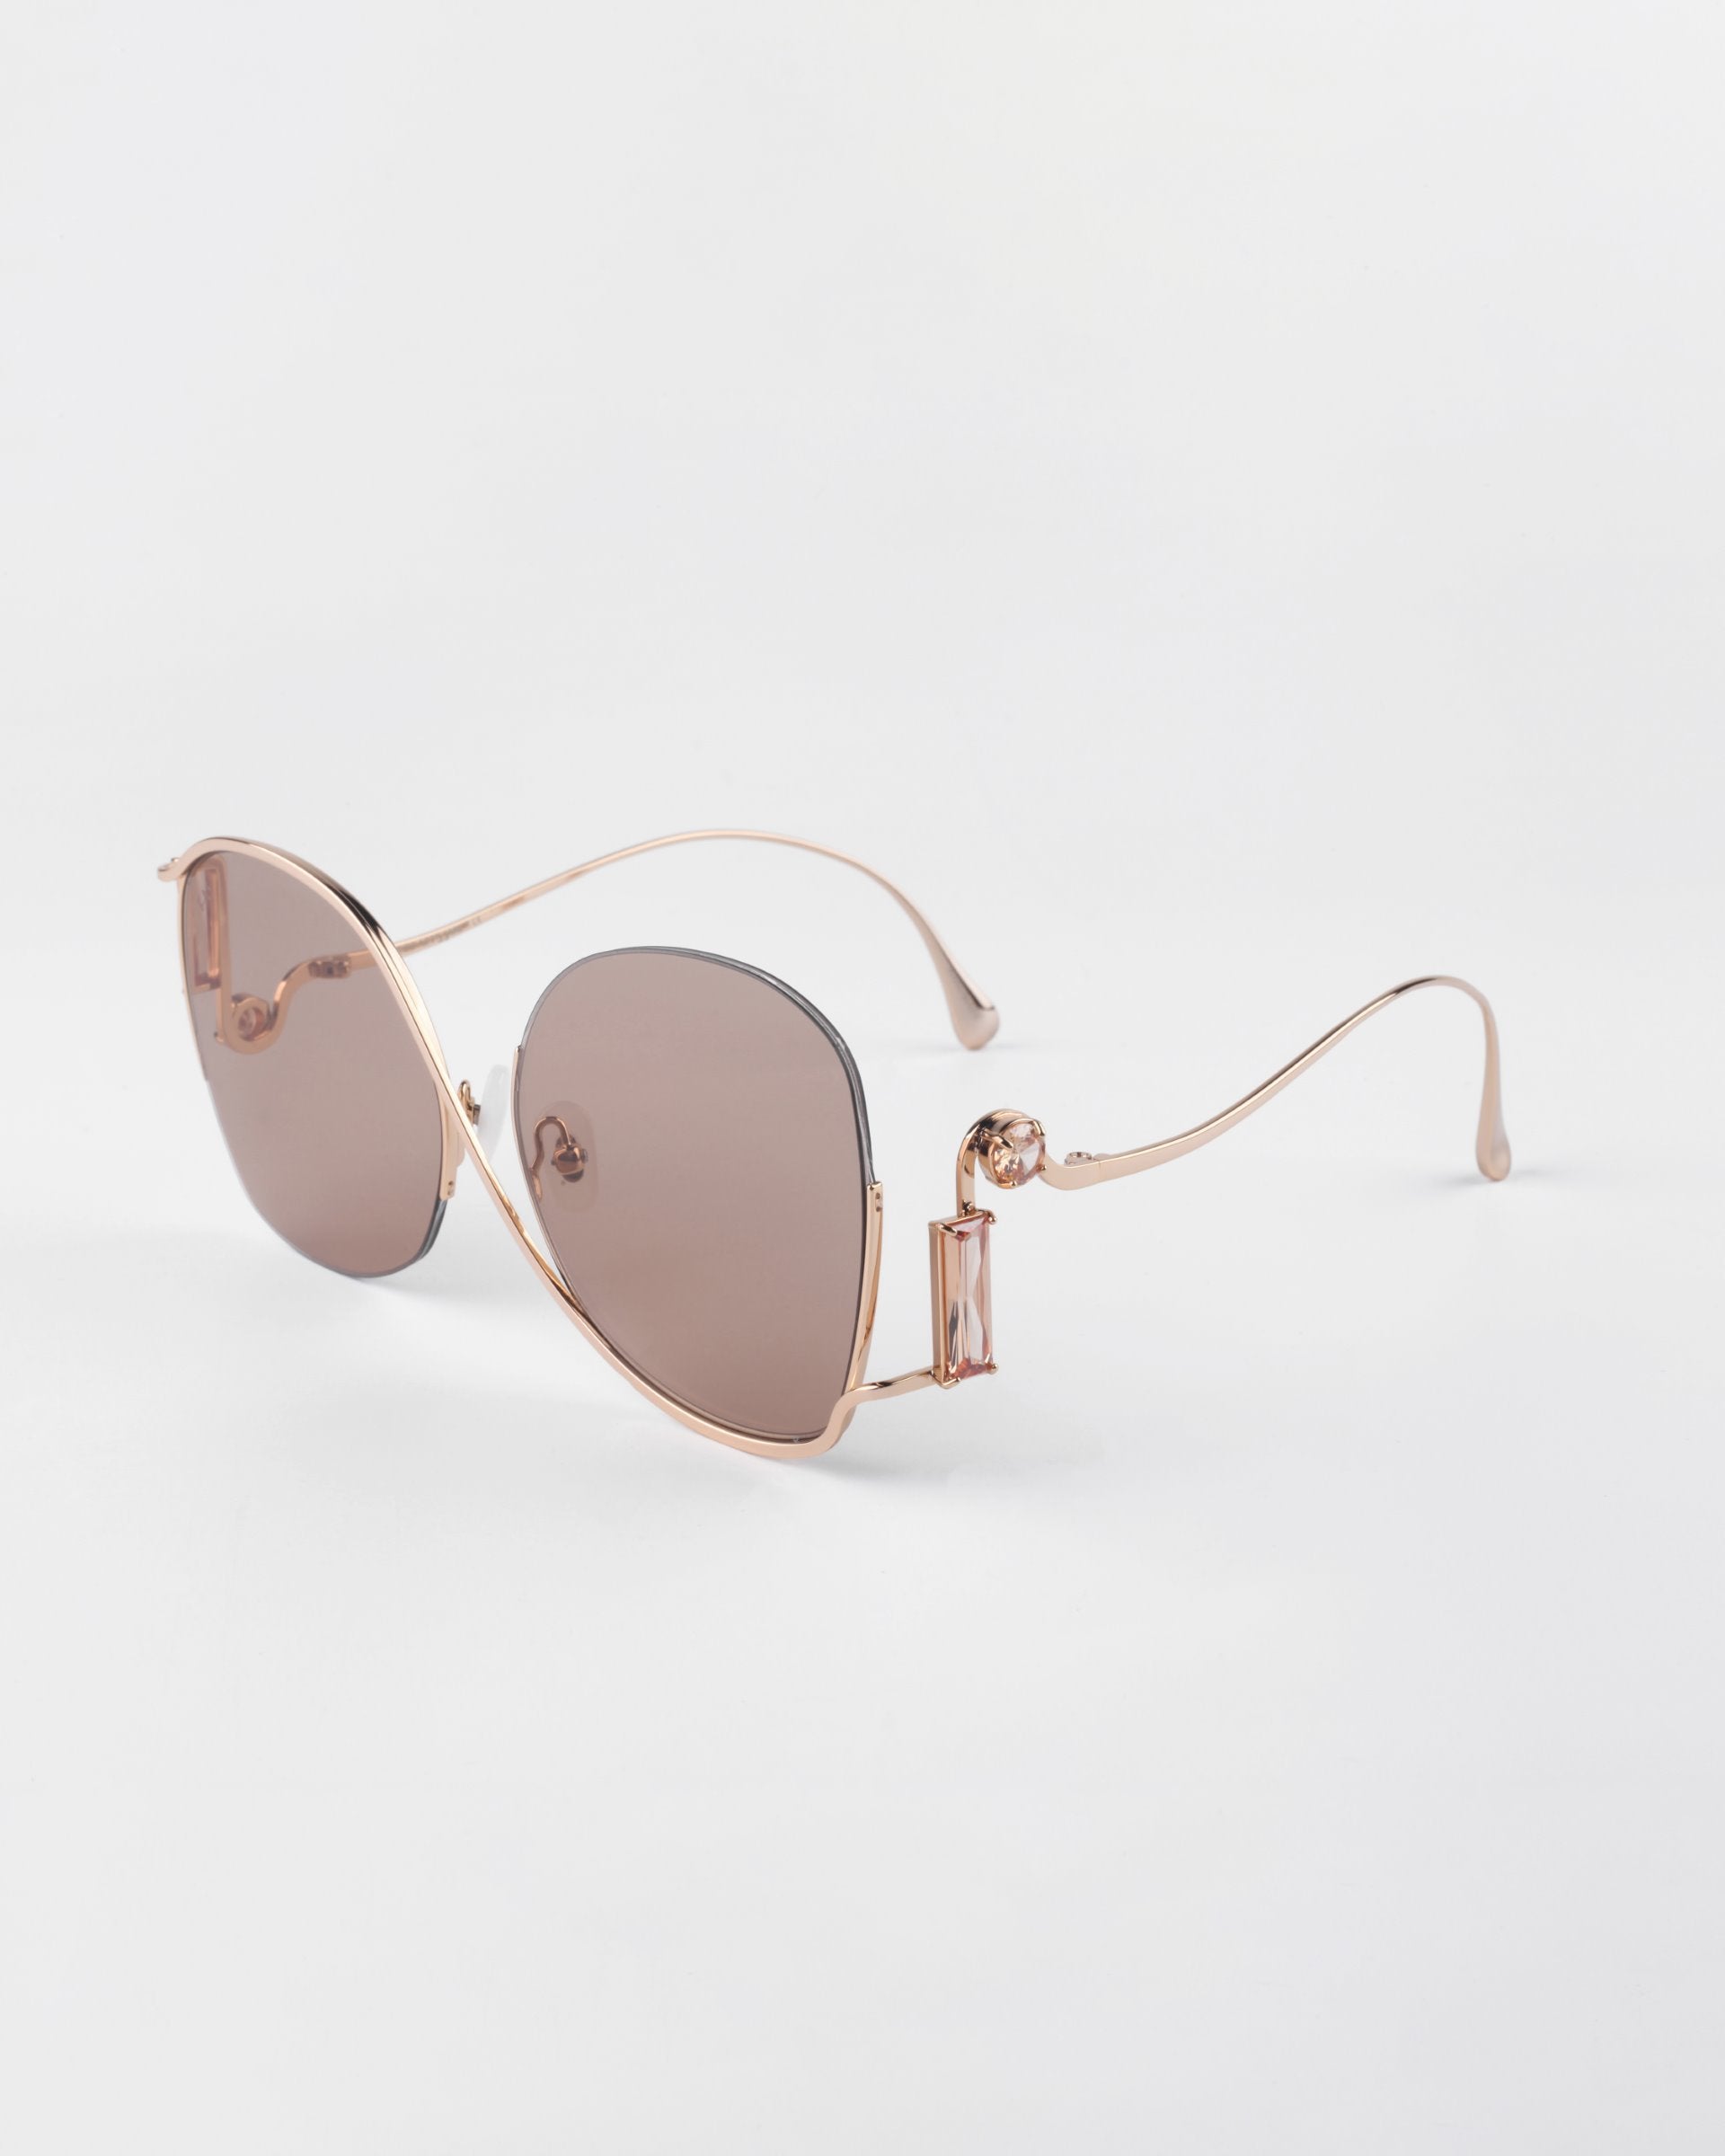 A pair of luxurious For Art&#39;s Sake® Sapphire sunglasses with rose gold frames and brown-tinted lenses. The design features smooth, curved lines with thin temples, and small crystal embellishments on the sides. These stylish glasses with UV protection rest on a white surface.